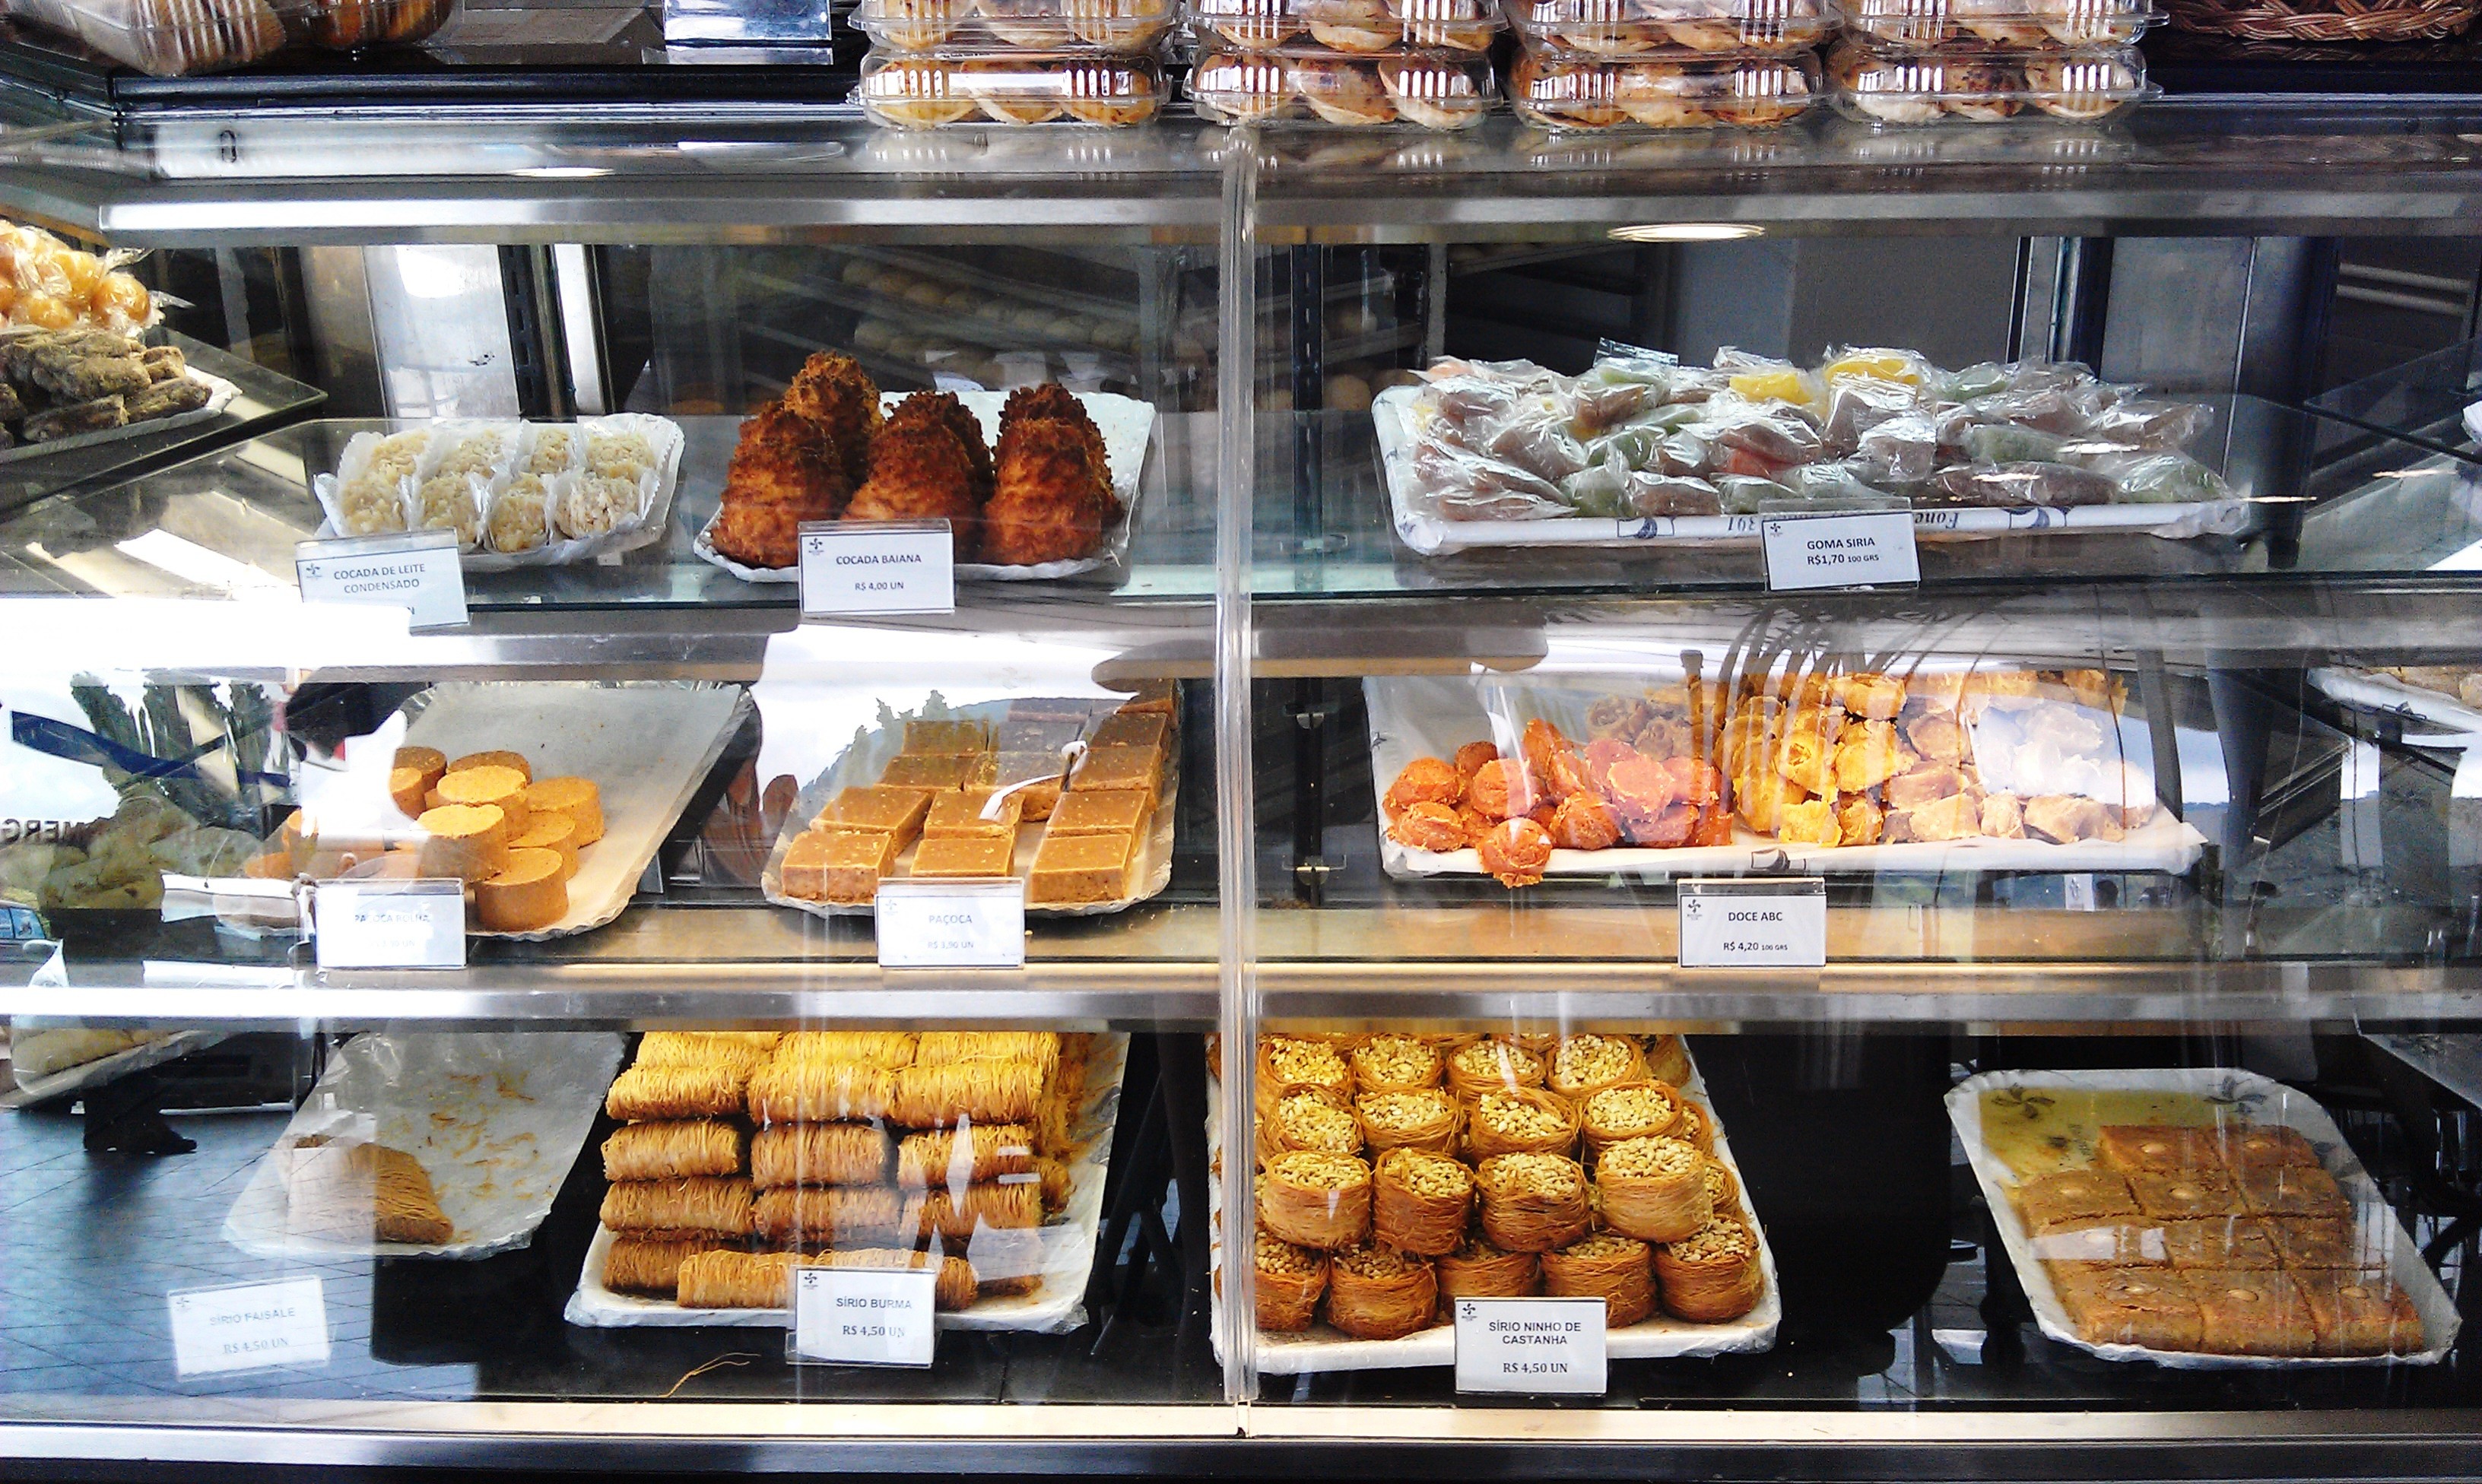 Brazilian Breads and Pastries